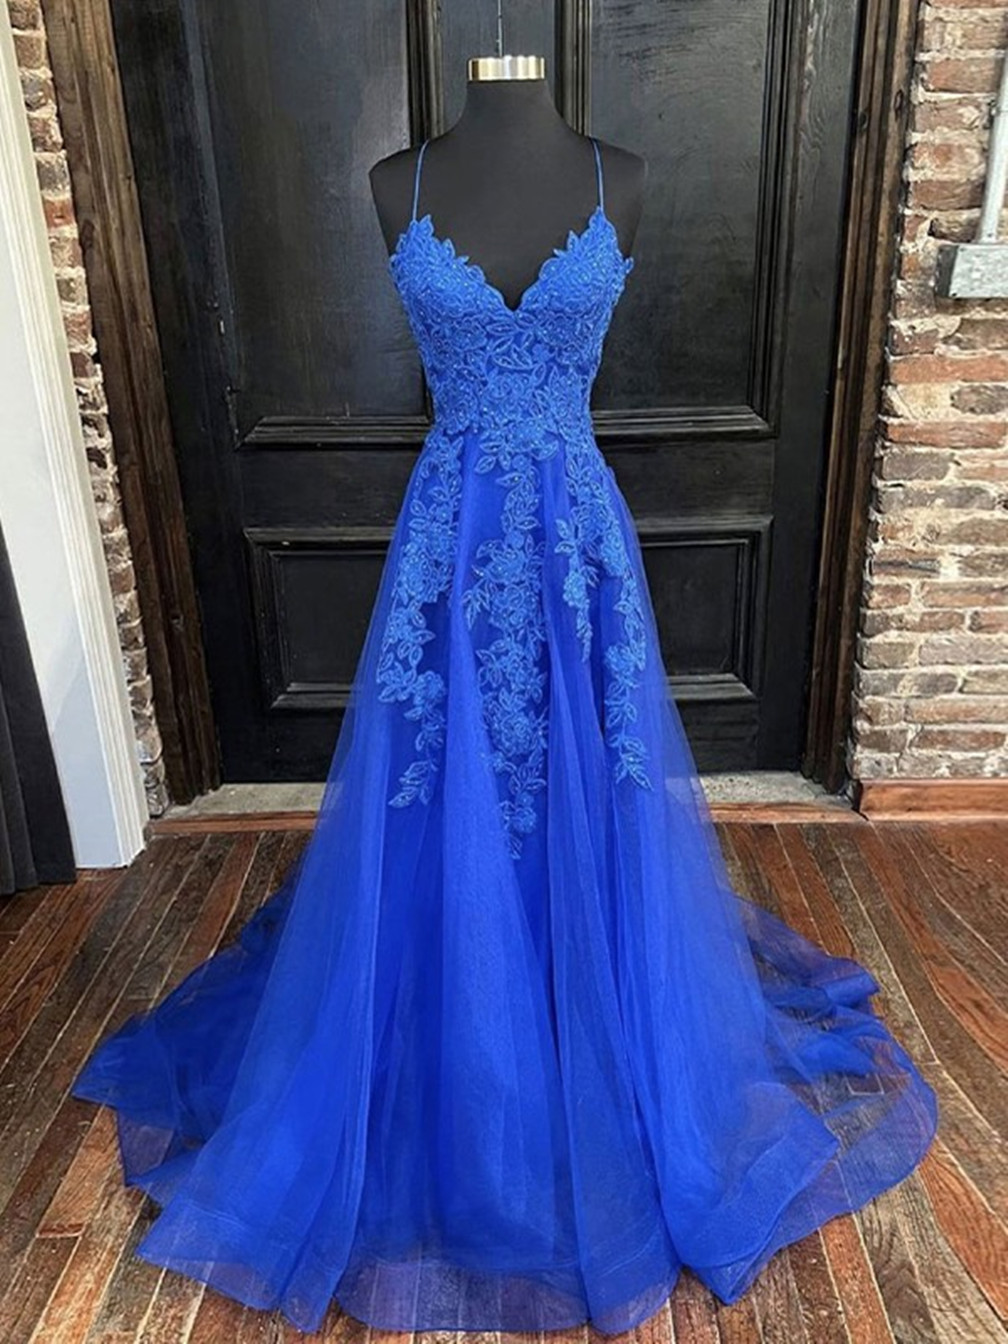 Women A-line/princess Appliques Prom Dresses Long Lace V-neck Evening Gowns Sleeveless Formal Party Dress Yp021